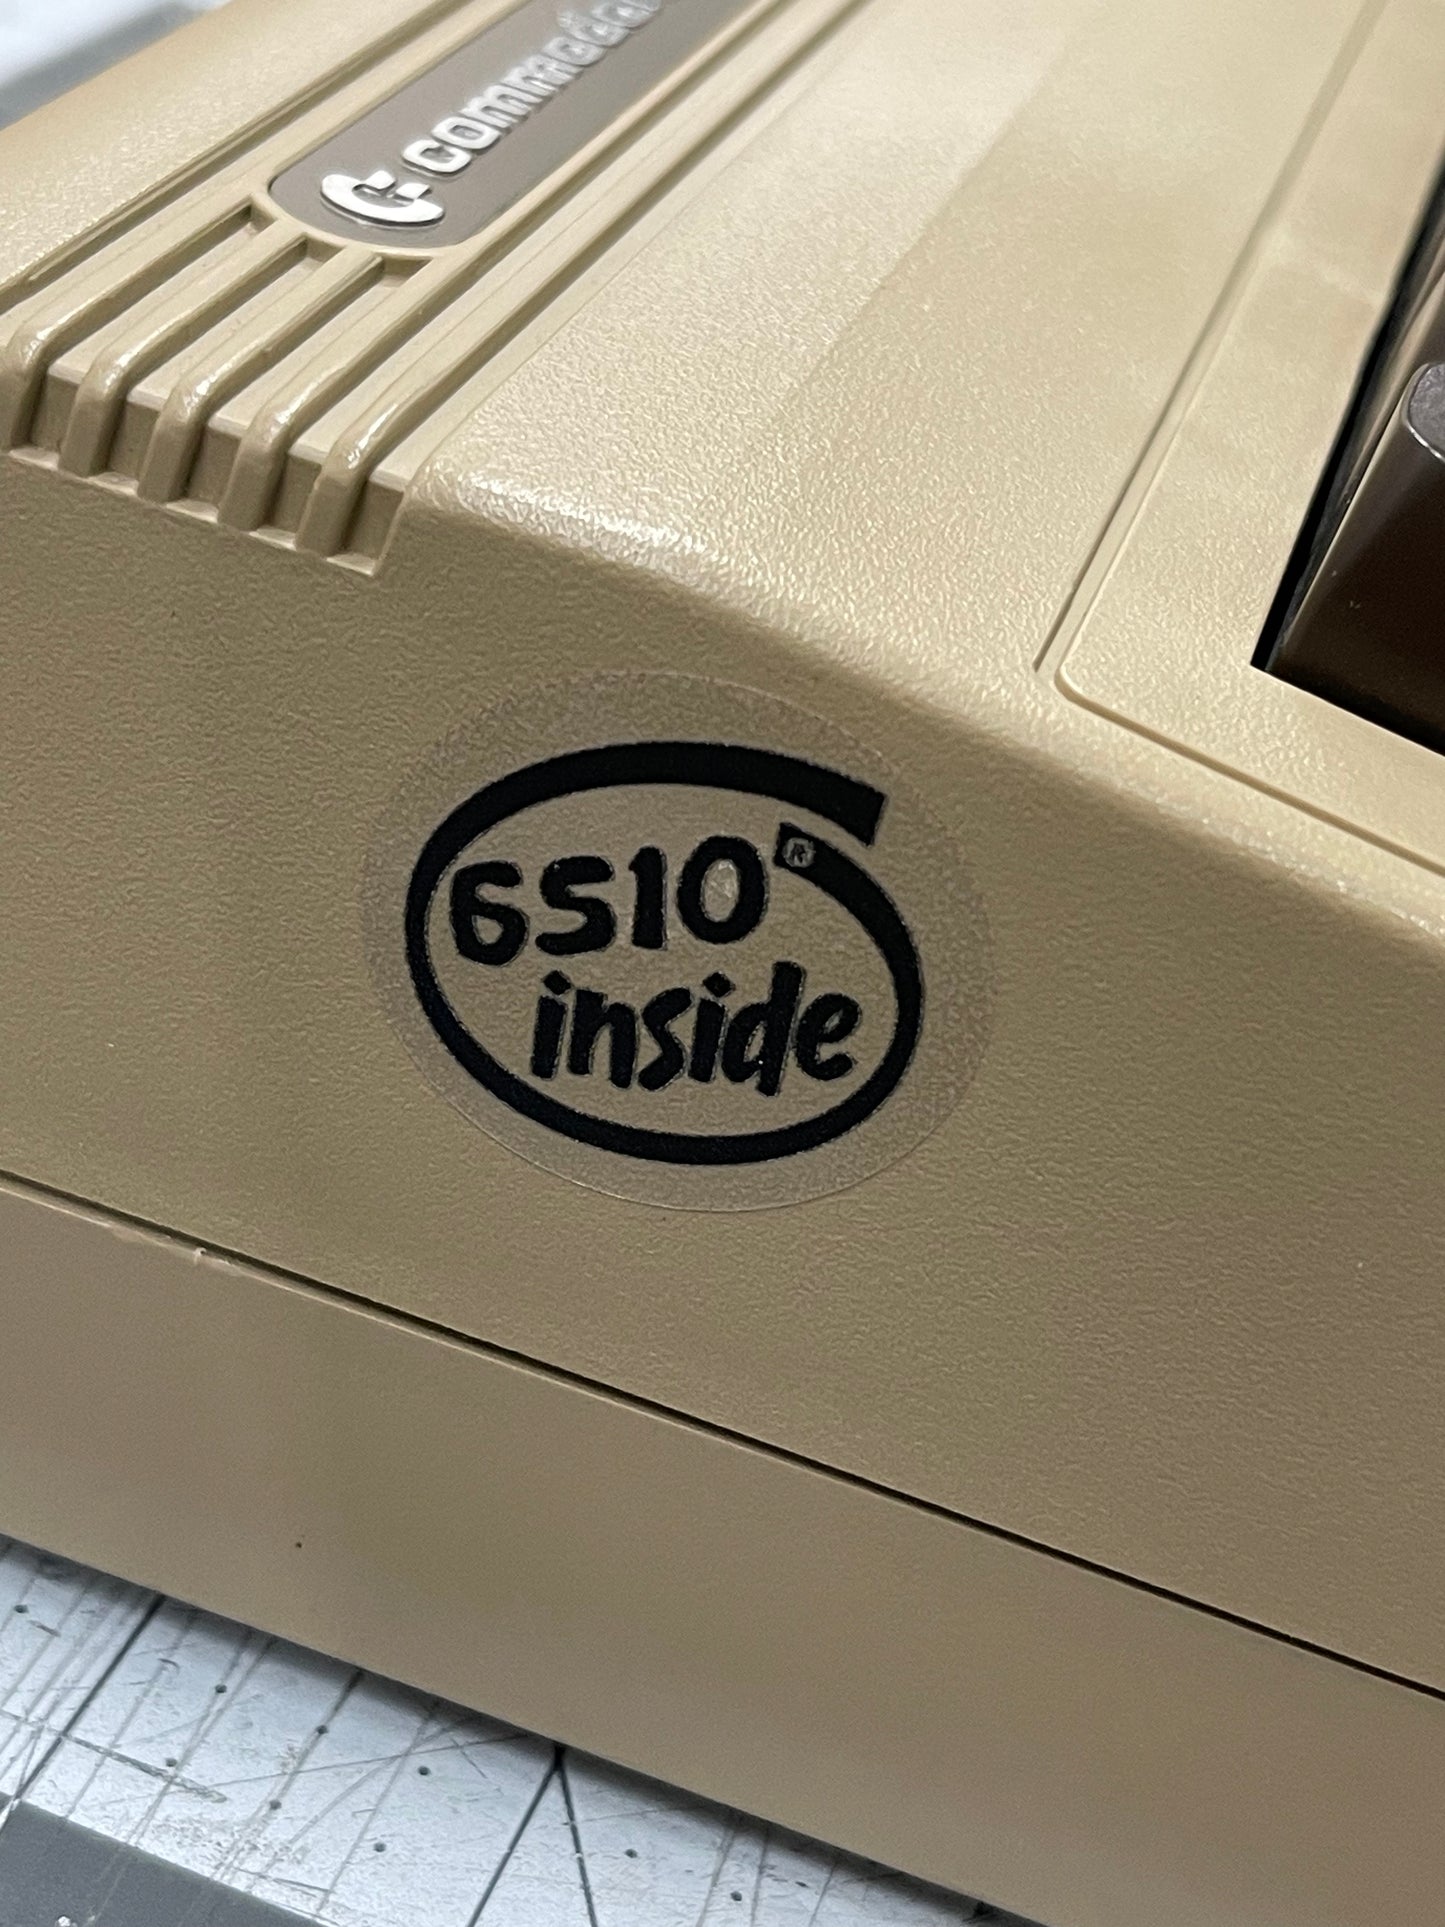 “6510 inside” MOS Commodore 64 C64 Case Badge Sticker - Clear